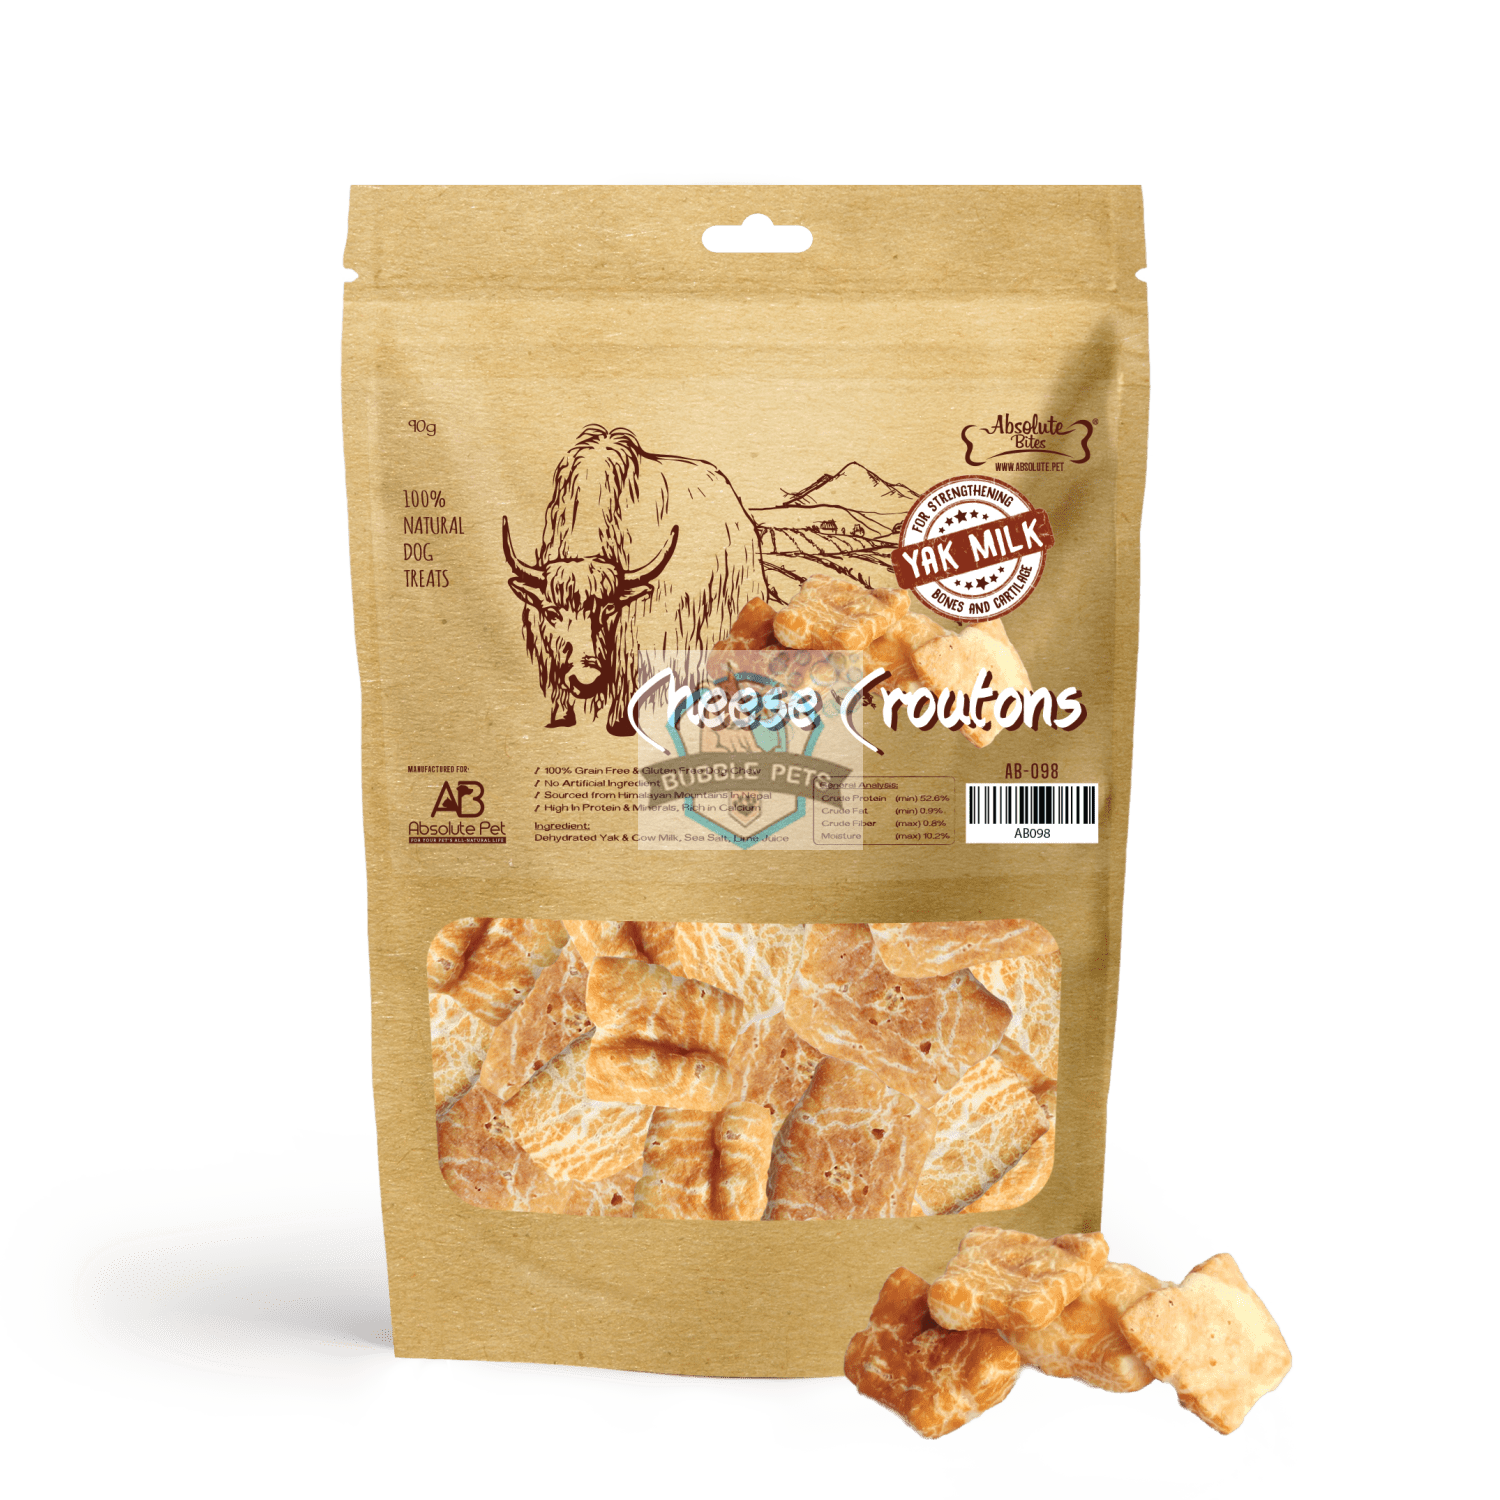 Absolute Bites Cheese Croutons